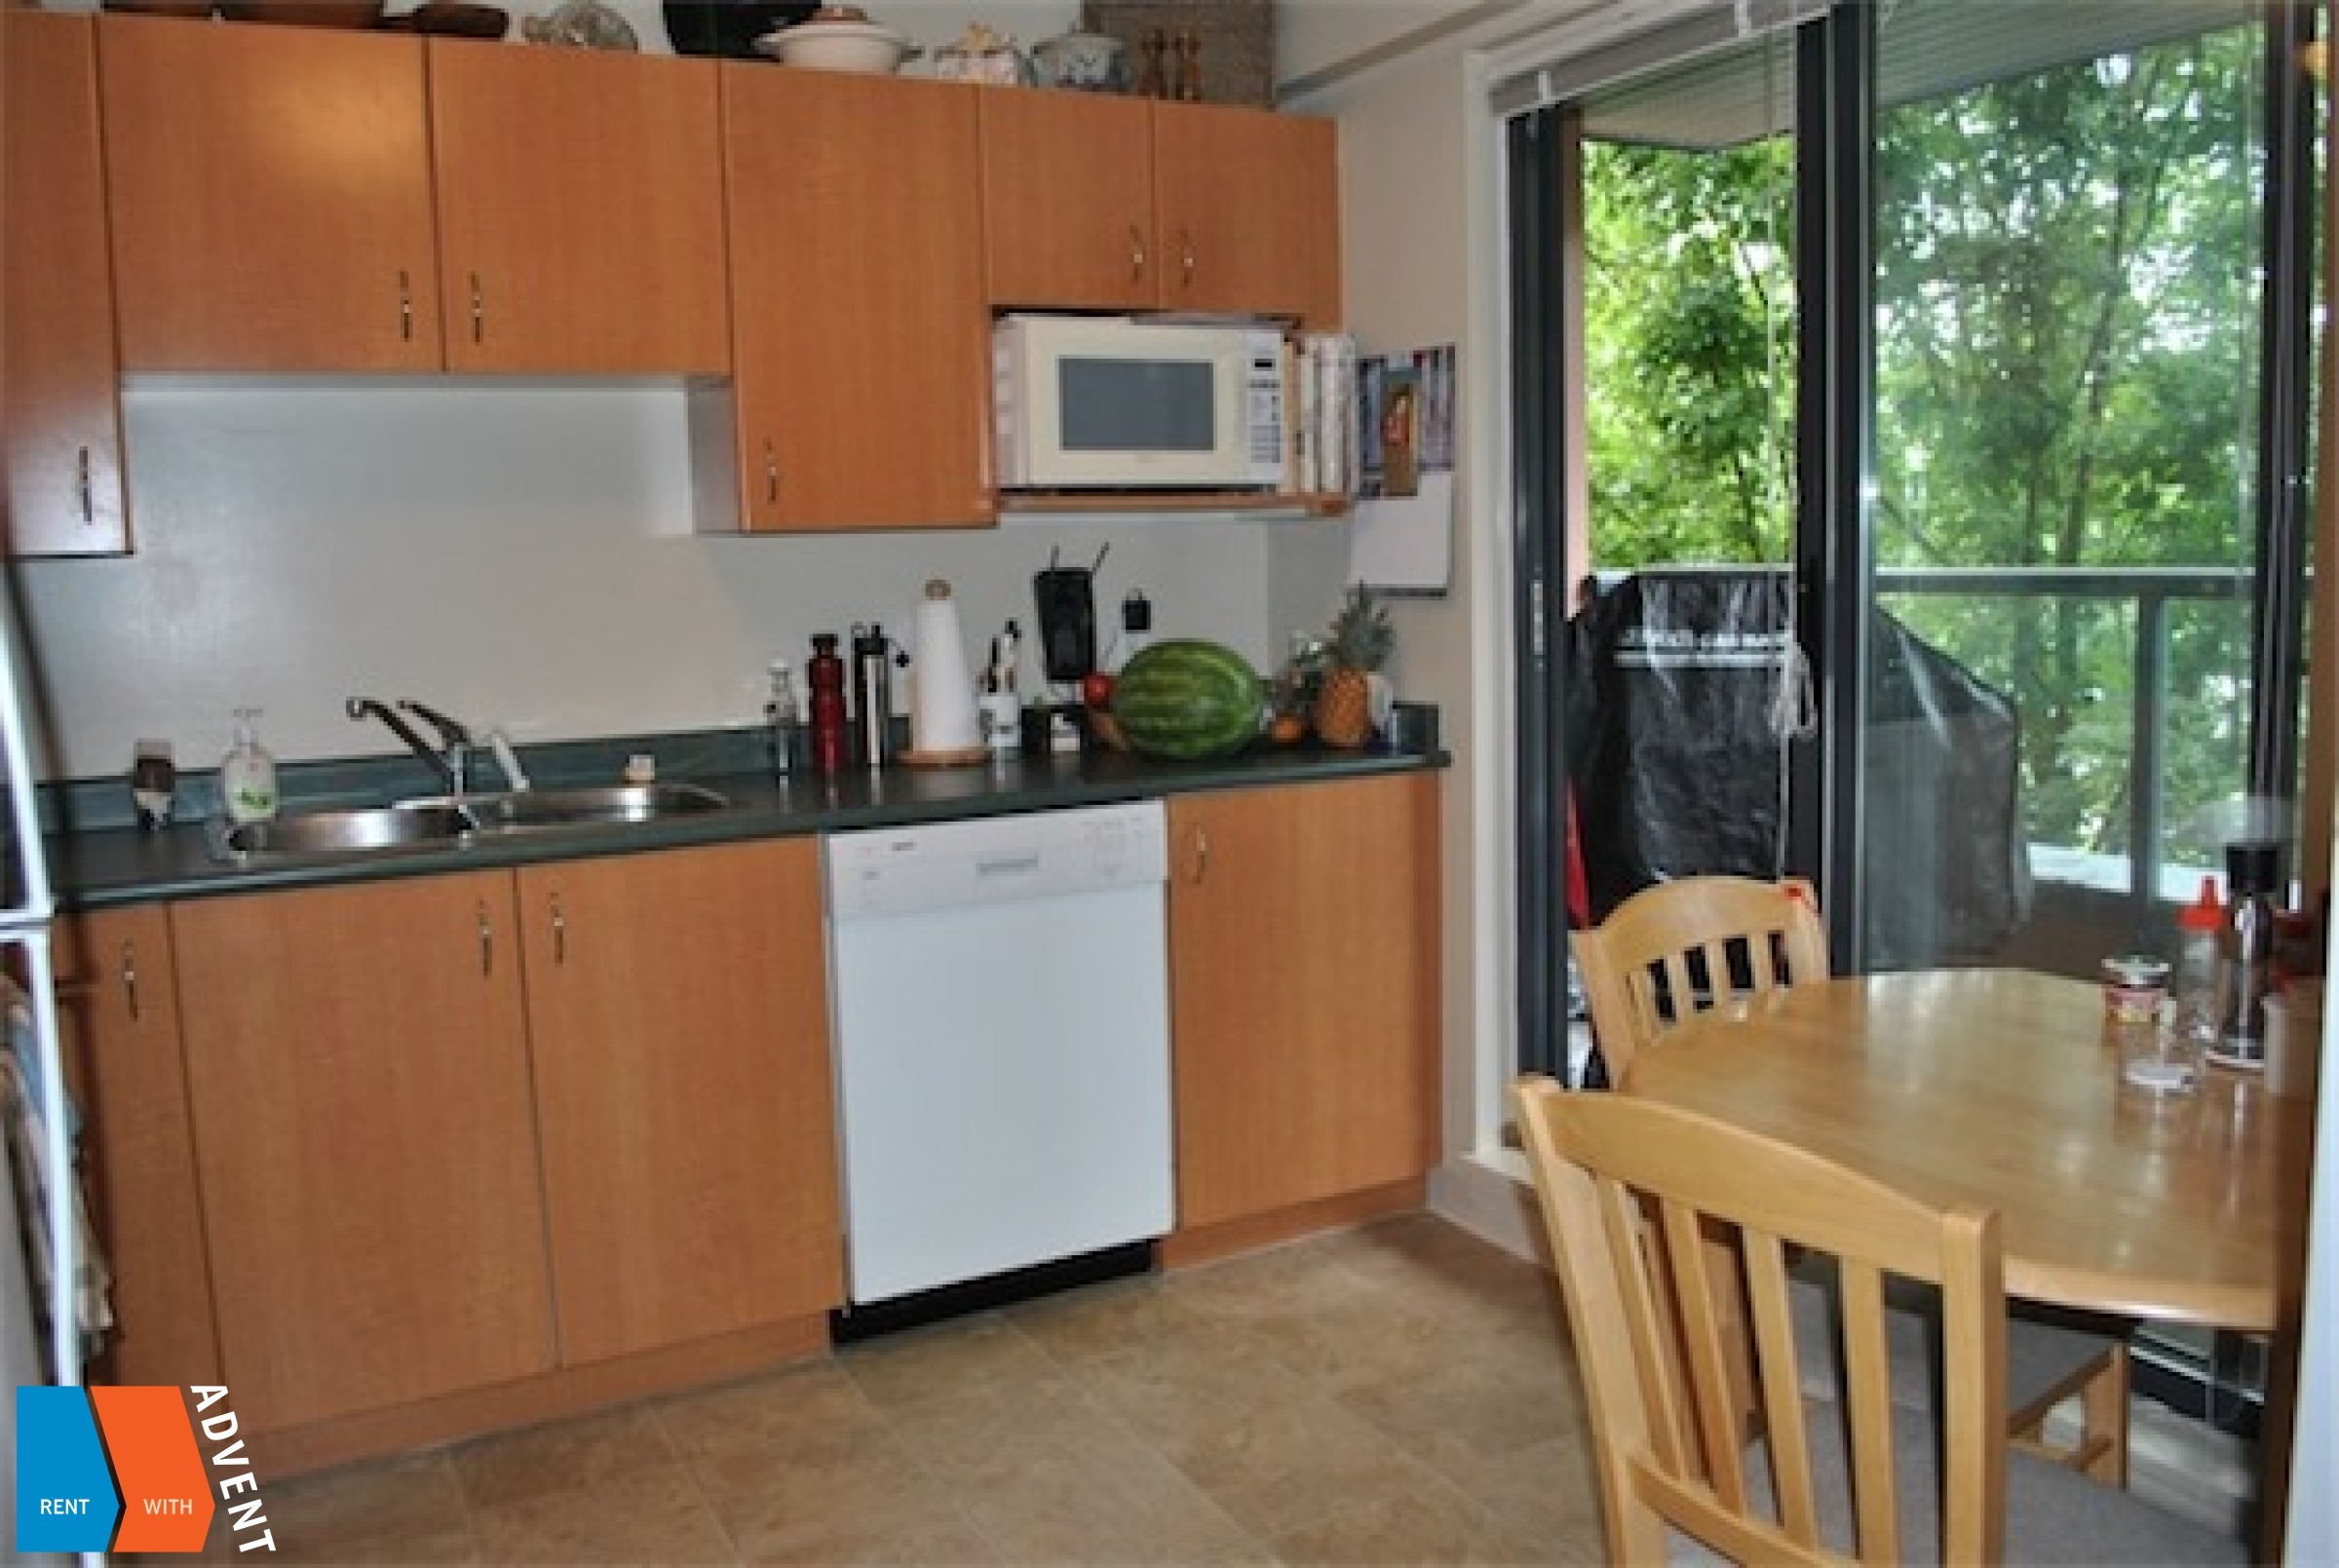 Amberley Unfurnished 3 Bedroom Apartment For Rent in East Vancouver. 205 - 3583 Crowley Drive, Vancouver, BC, Canada.